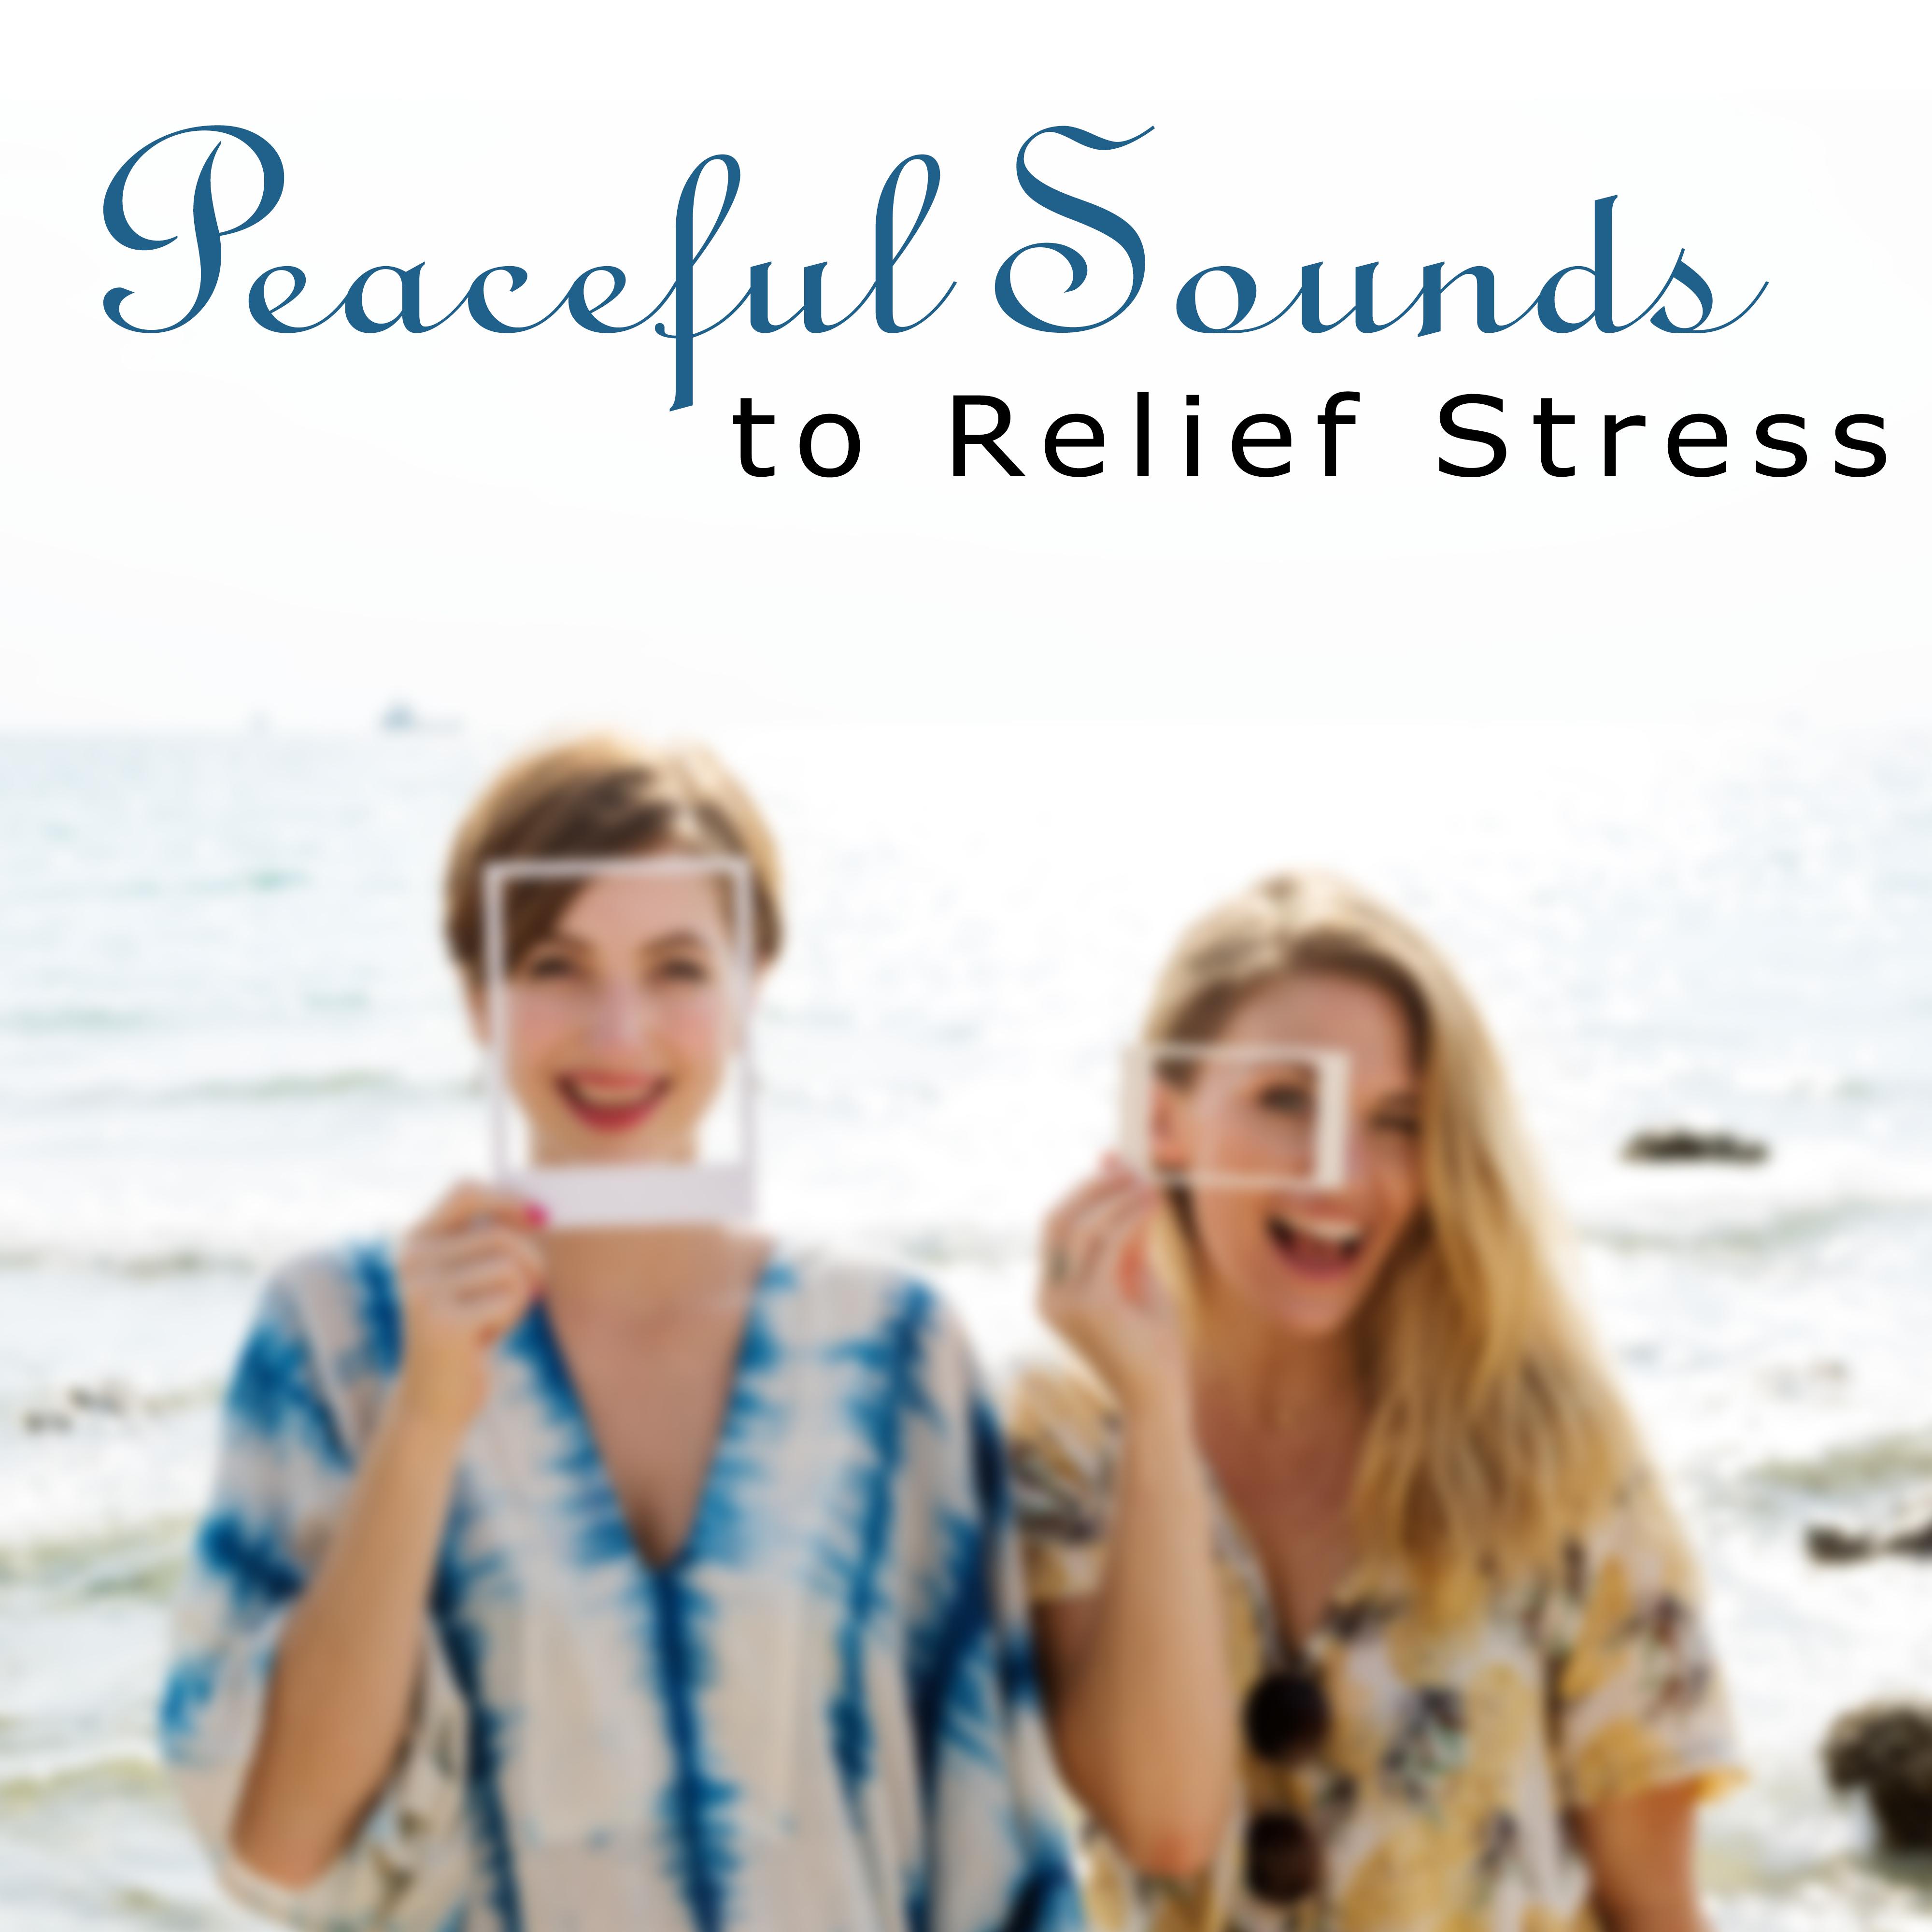 Peaceful Sounds to Relief Stress – Easy Listening, Calming Waves, New Age Relaxation, Music to Calm Mind, Rest a Bit